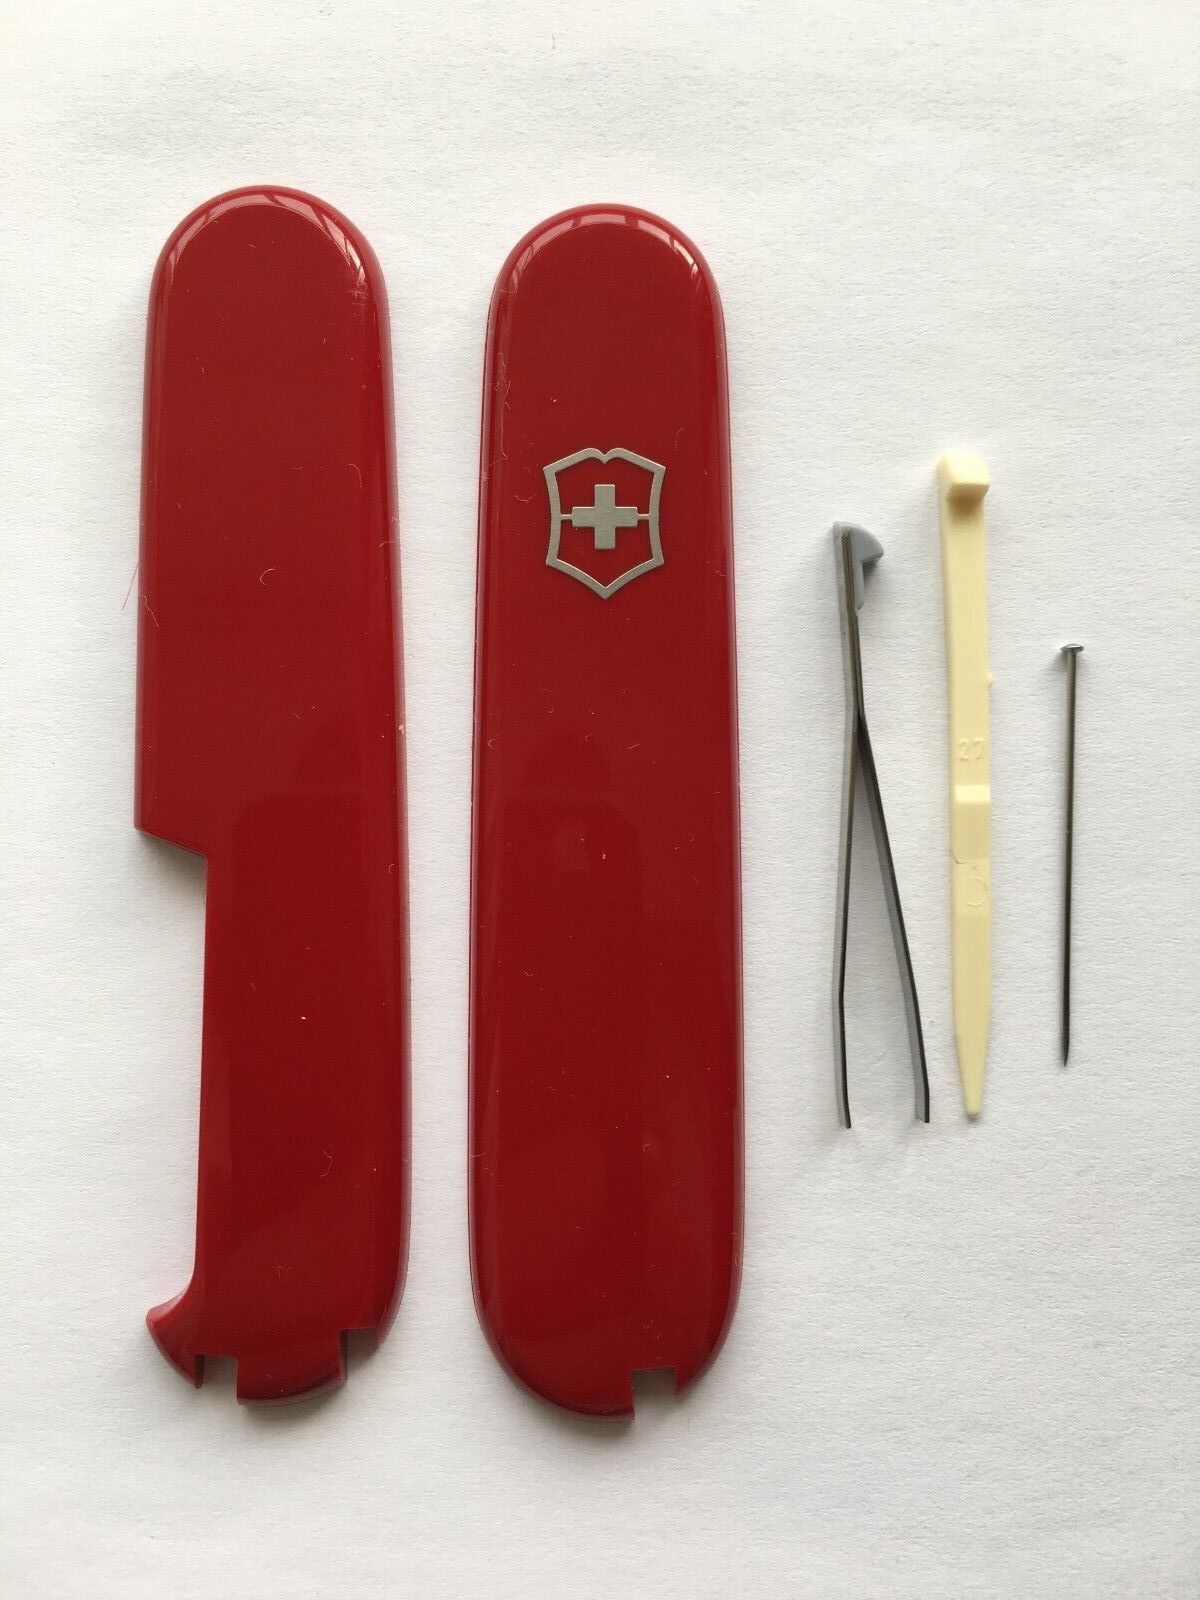 SWISS ARMY KNIFE VICTORINOX 91mm SCALES/HANDLES  PLUS  ACCESSORIES, PARTS